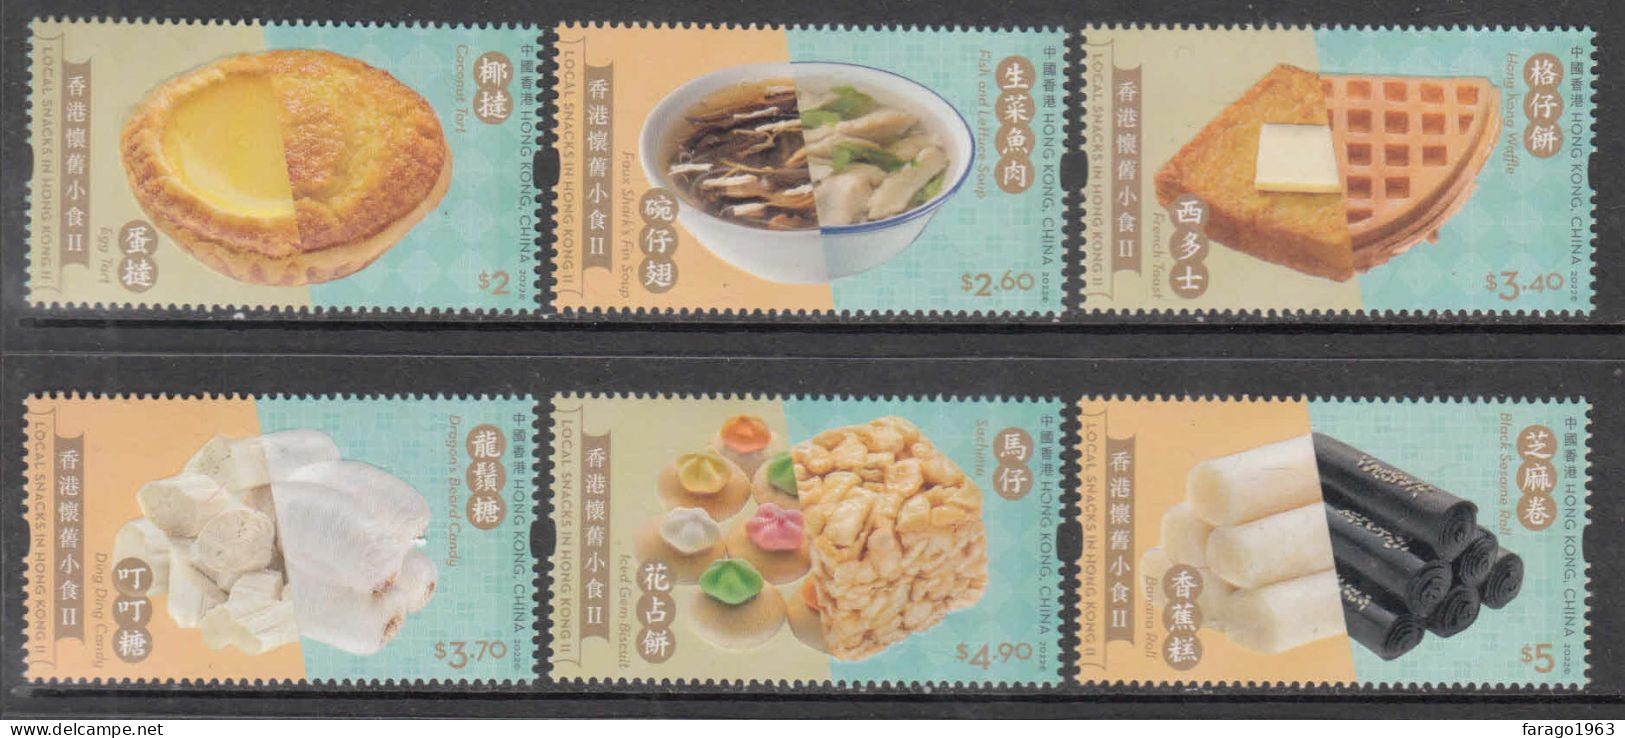 2022 Hong Kong Local Snacks Gastronomie  Complete Set Of 6 MNH @  FACE VALUE - Nuevos